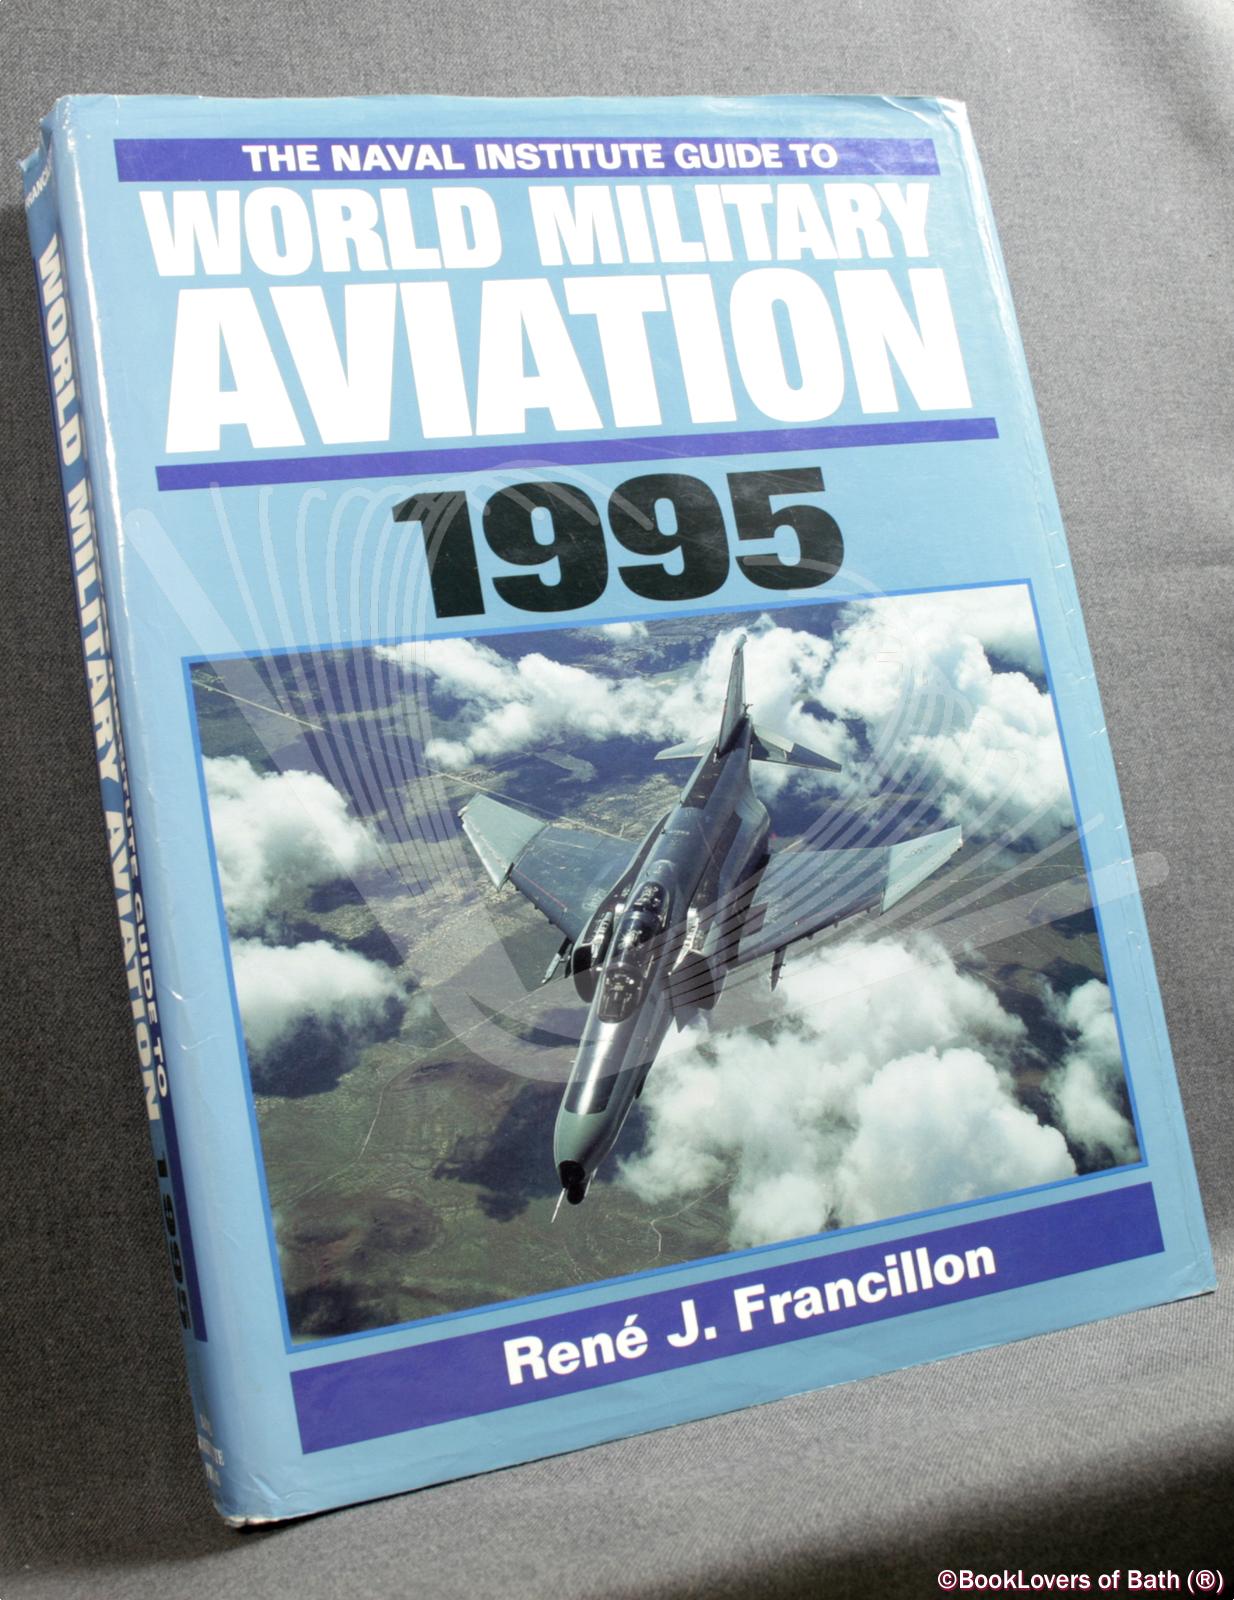 The Naval Institute Guide to World Military Aviation 1995